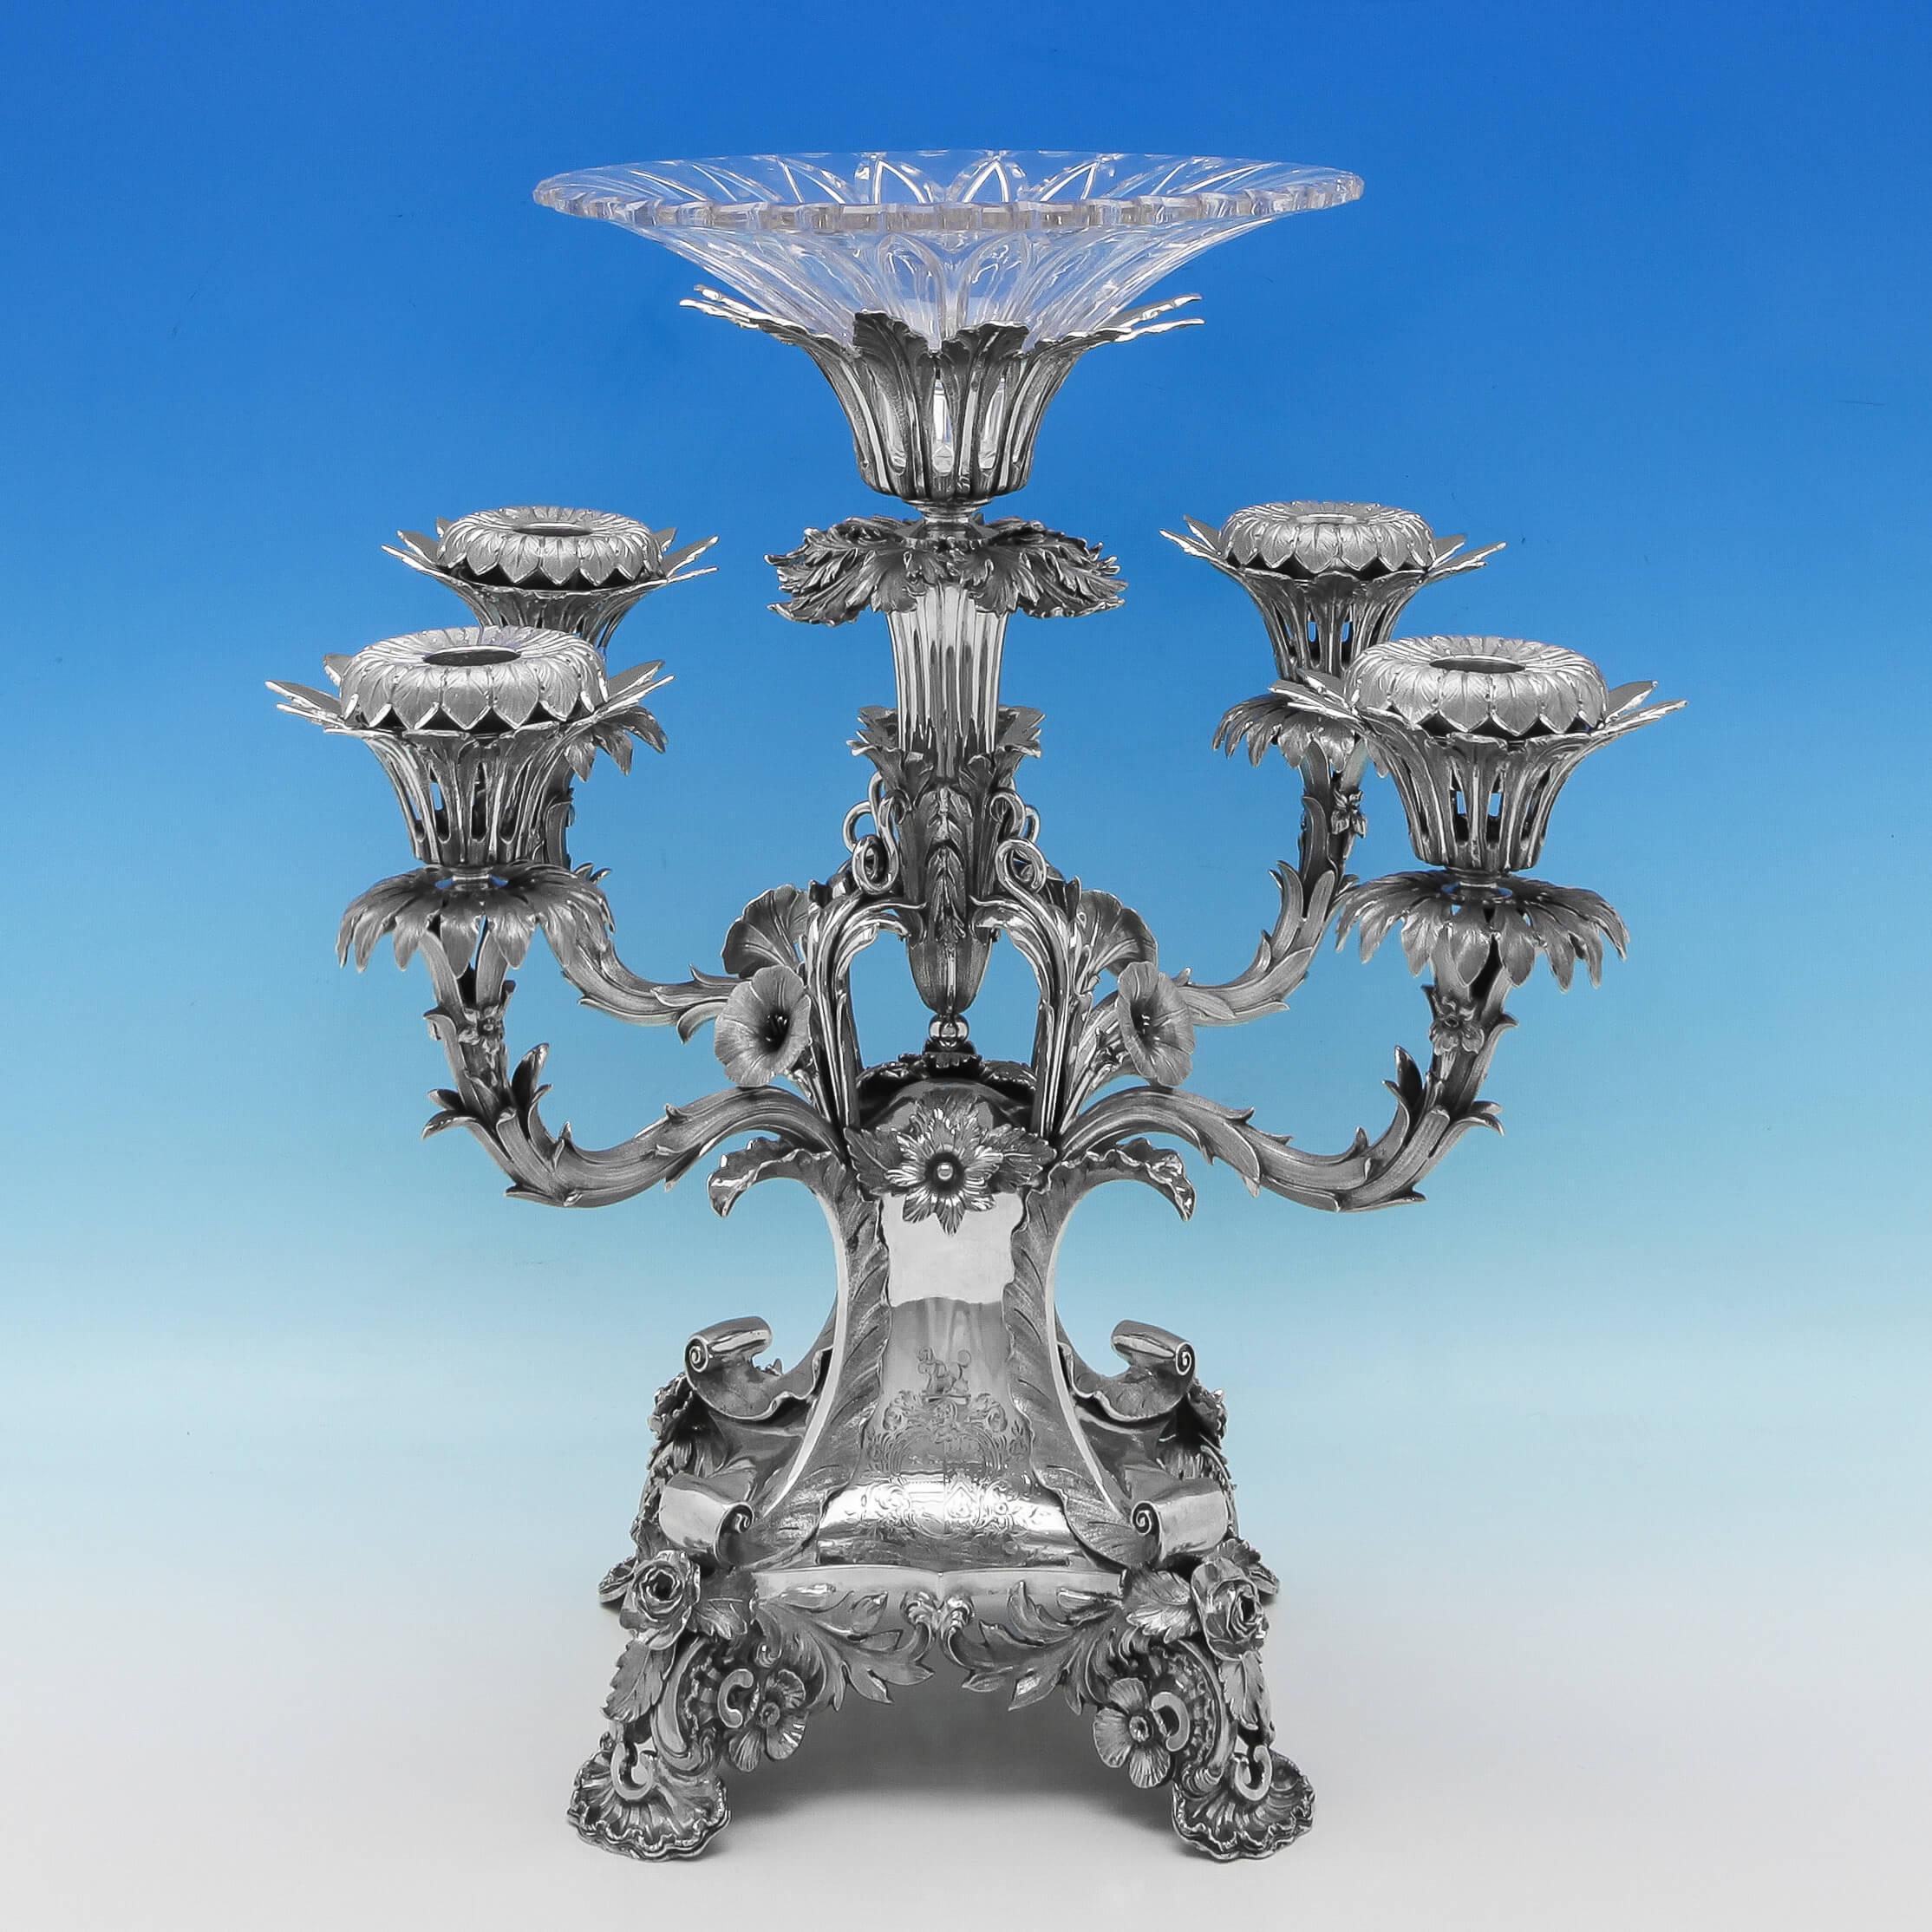 Hallmarked in Birmingham in 1834 by Robinson, Edkins & Aston, this beautiful, William IV, Antique, sterling silver centrepiece, has a central glass bowl, and 4 smaller bowls which can be switched for silver sconces to allow the use of candles.